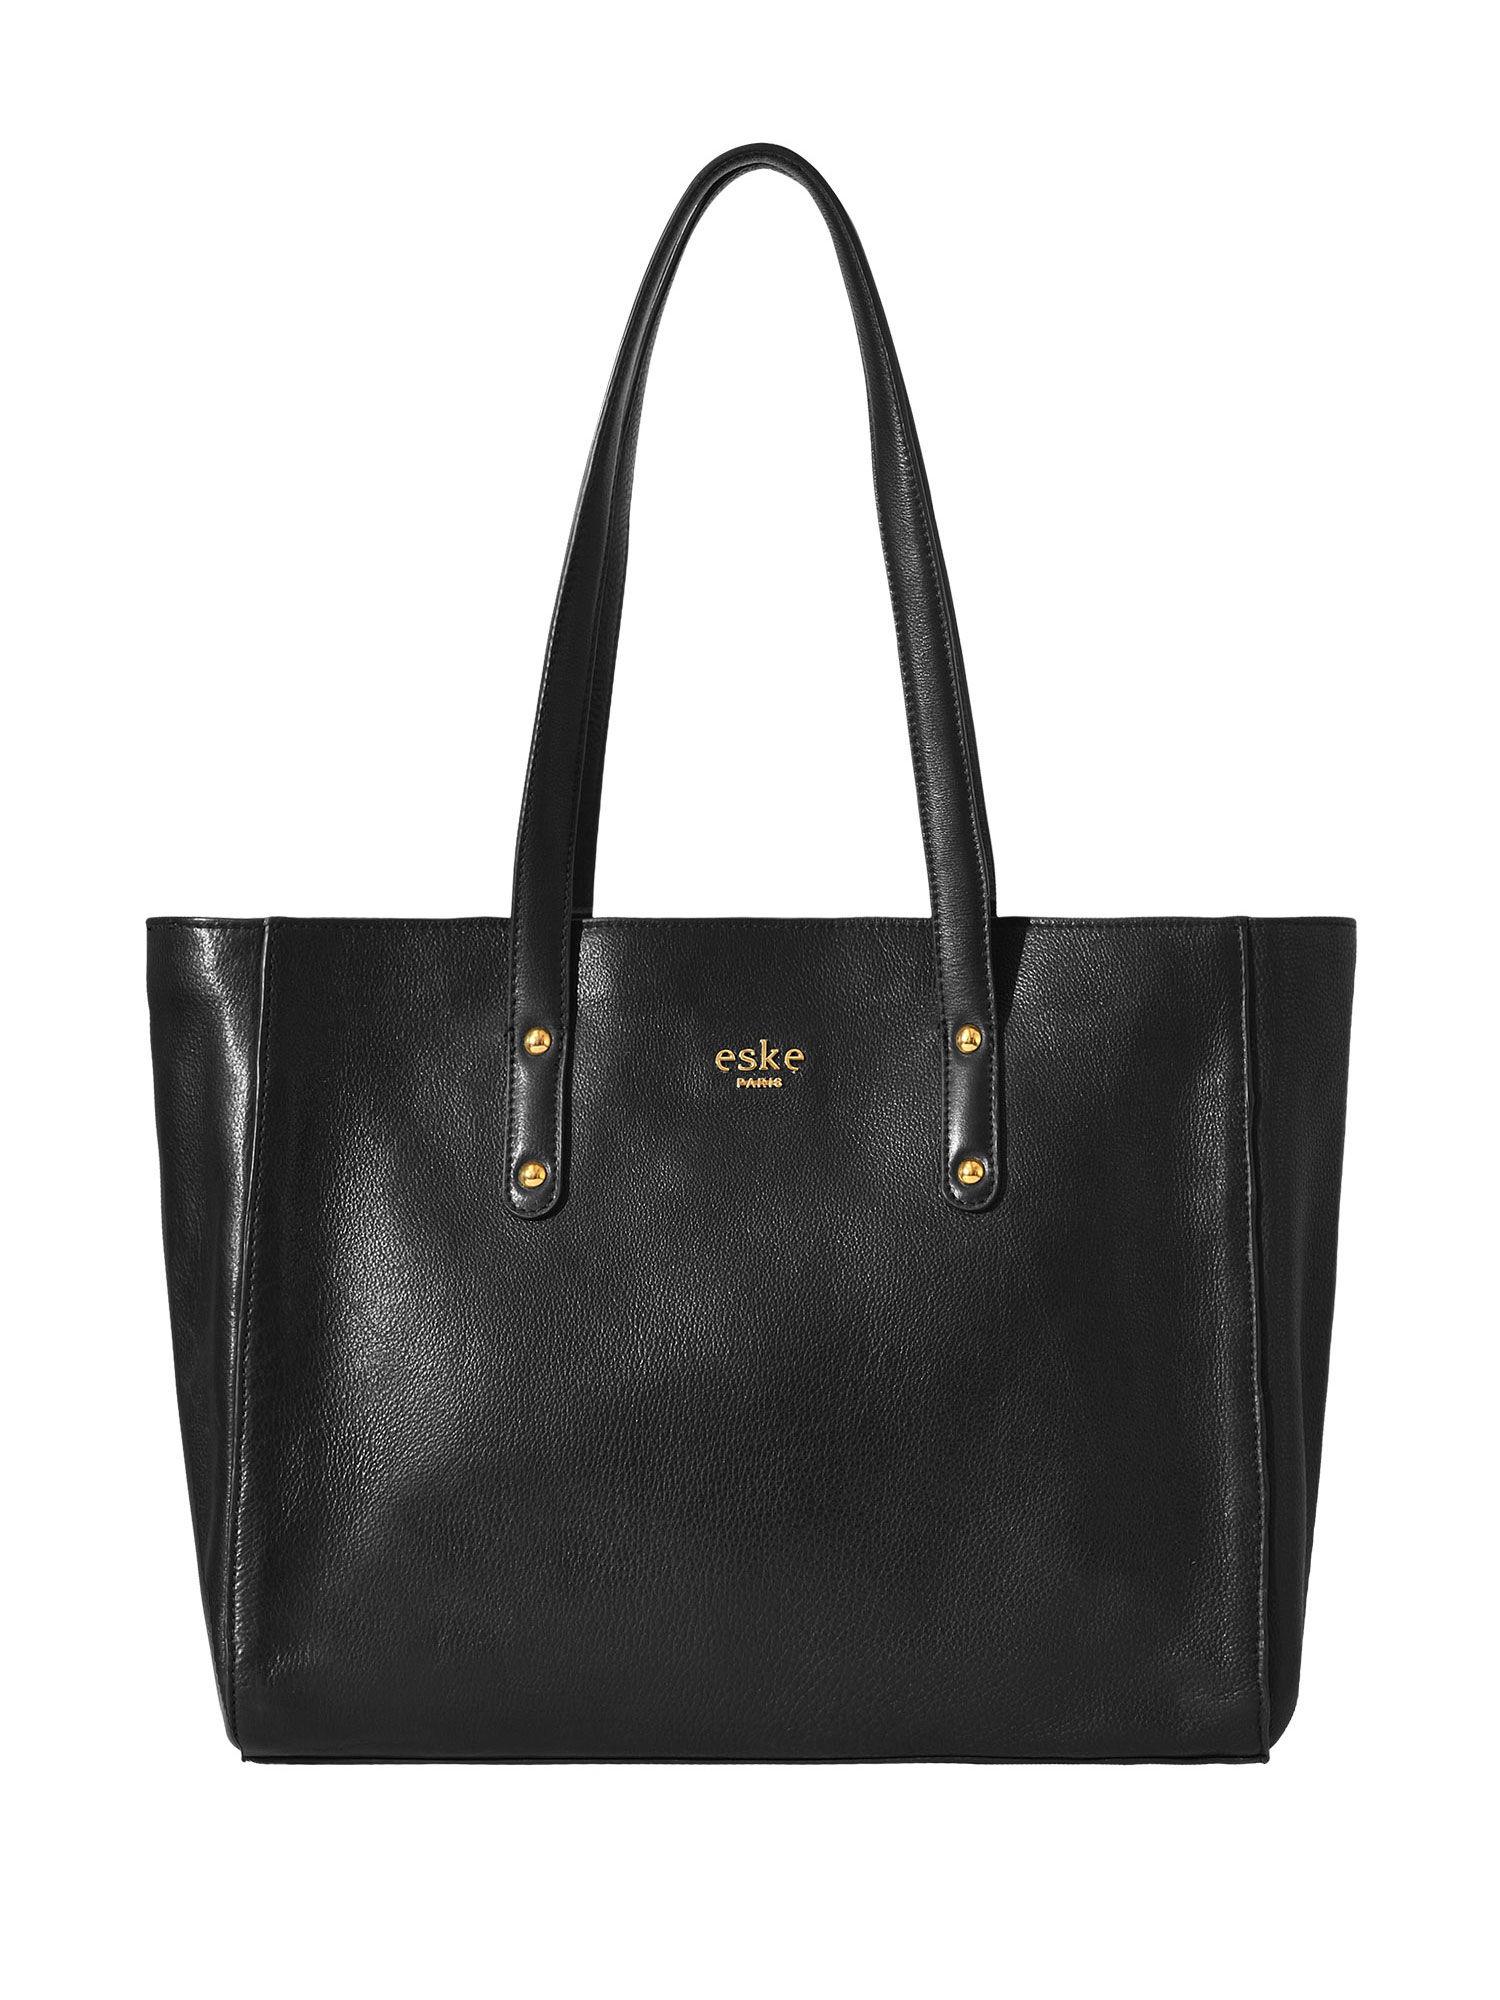 black color solid totes for women